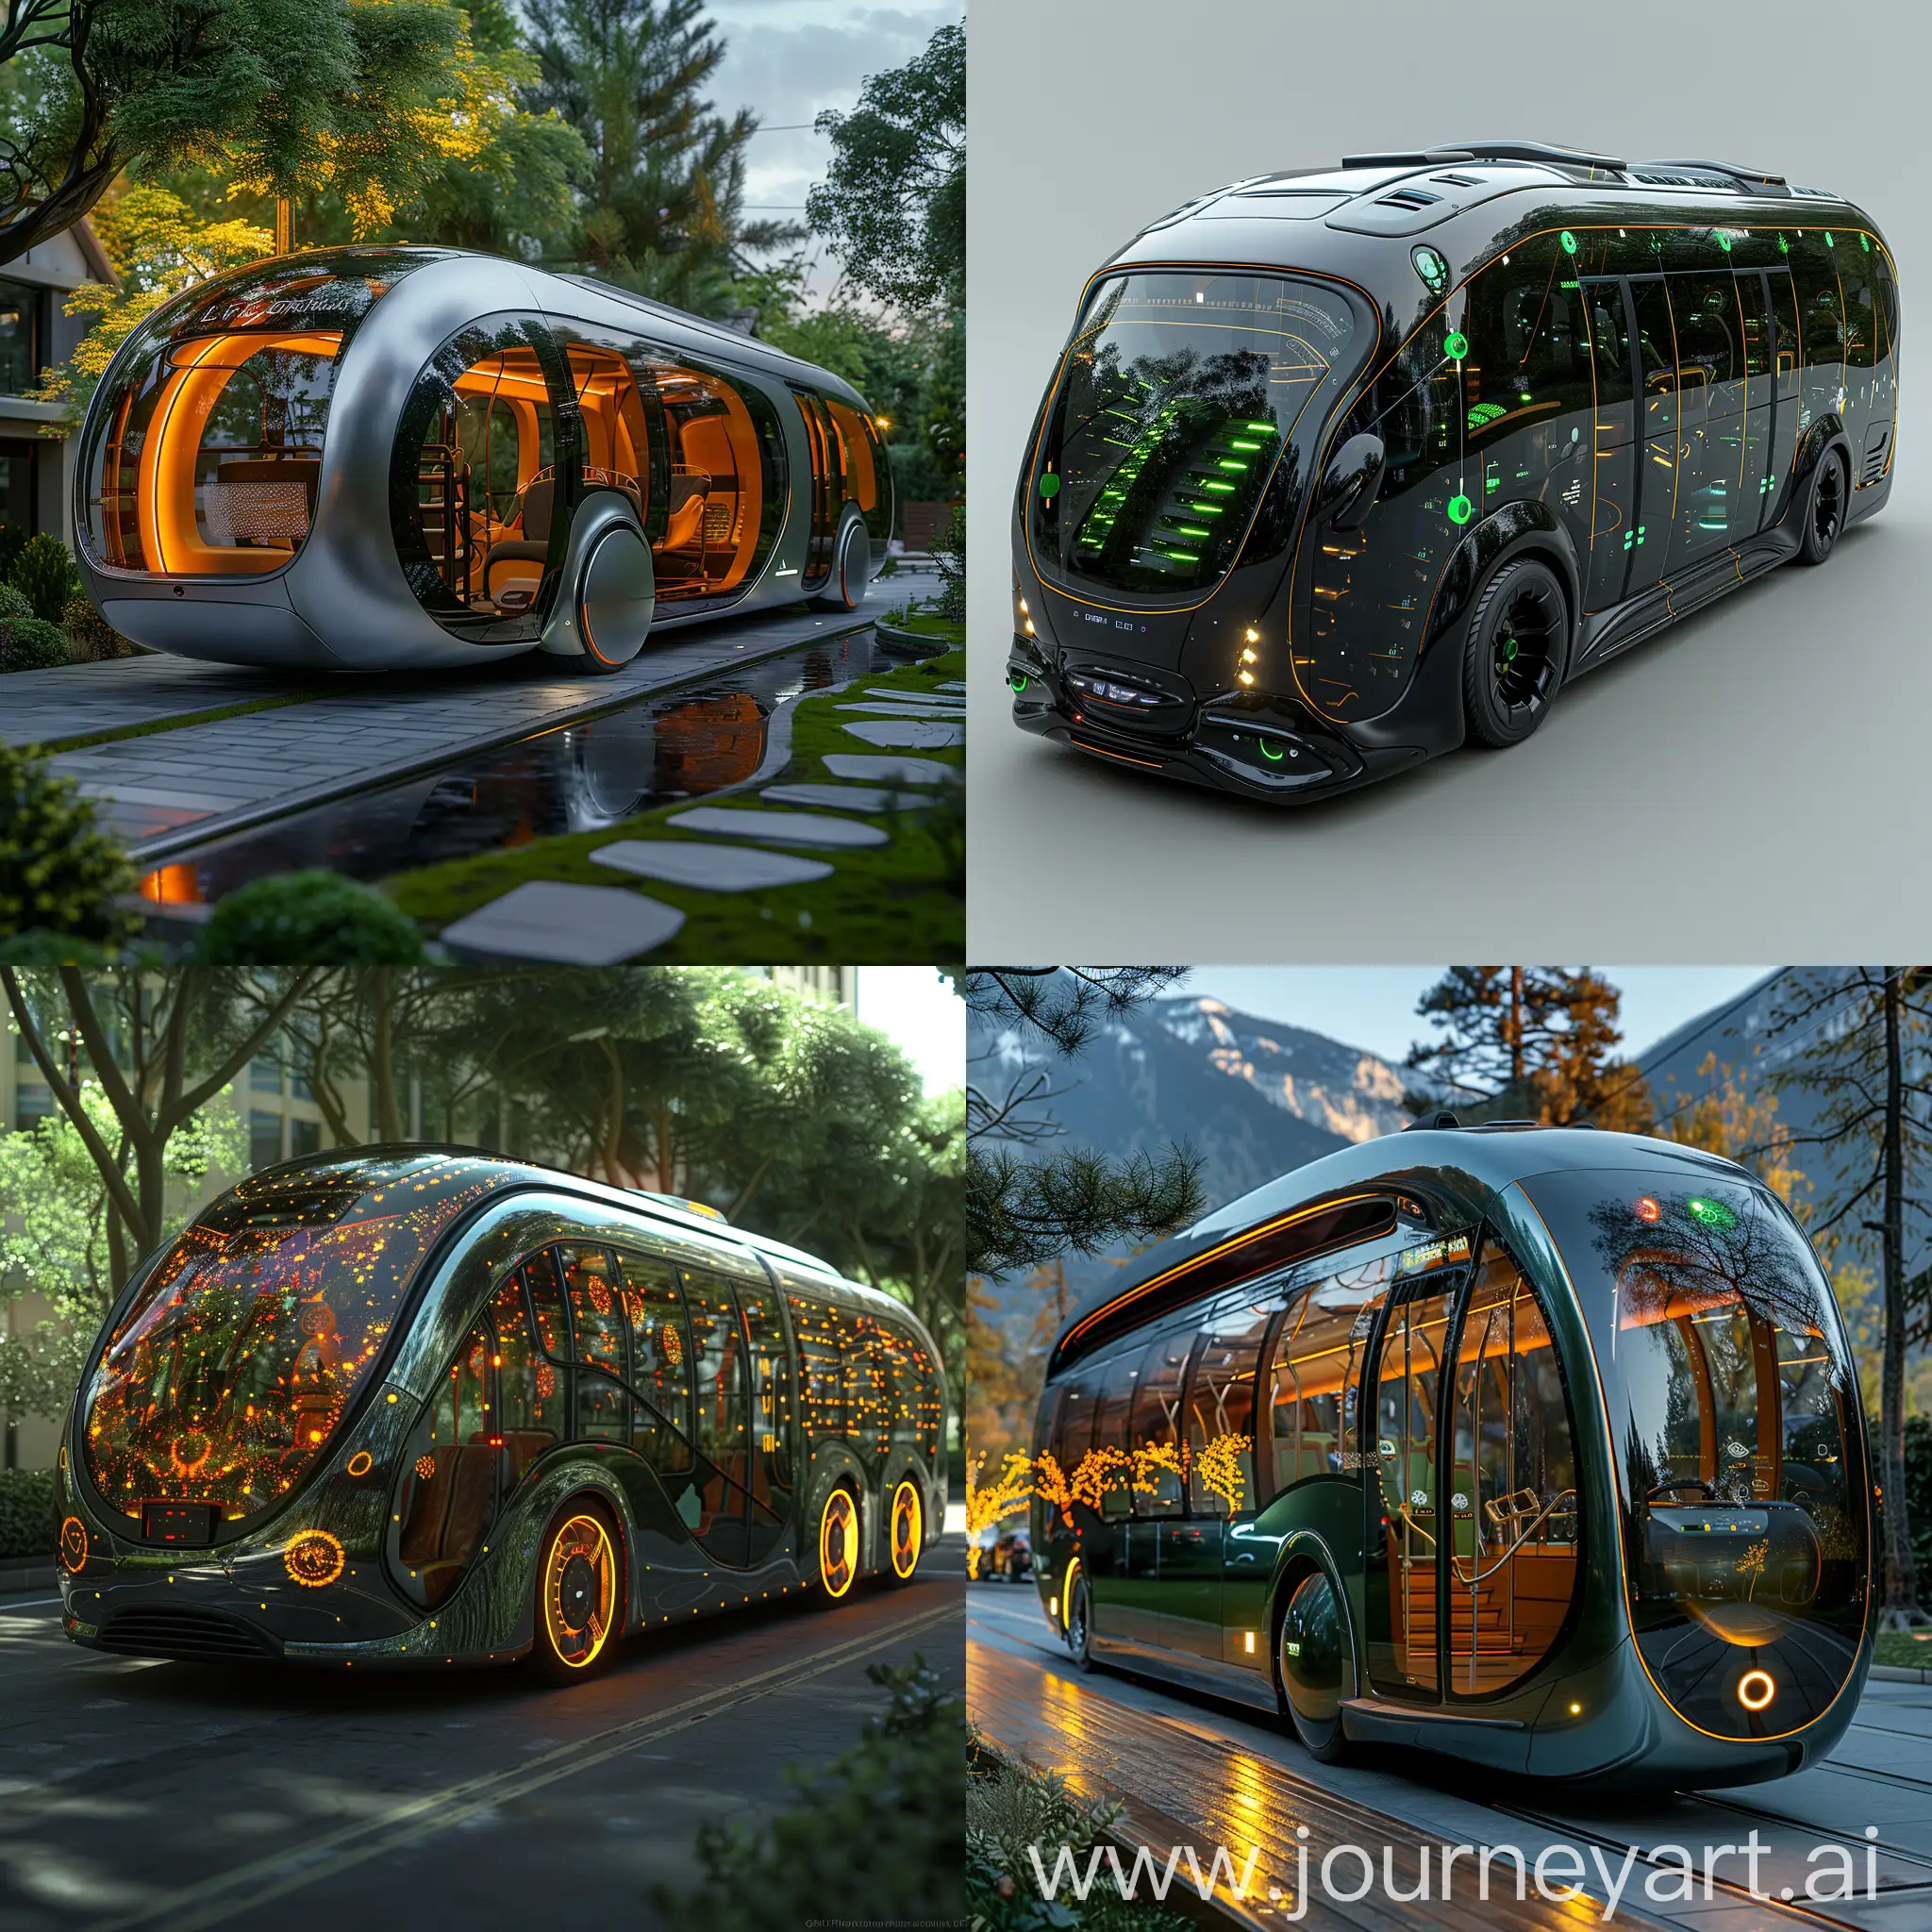 Futuristic bus, Electric Propulsion, Solar Panels, Regenerative Braking, Green Roof, Recycled Materials, Energy-Efficient LED Lighting, Smart HVAC System, Automatic Shut-Off Systems, Hybrid Technology, Real-Time Monitoring, Self-Healing Materials, Nanocoatings, Nanosensors, Nanoparticles in Tires, Nanofiltration System, Nanocomposites, Nanotech-Based Batteries, Nanorobots for Maintenance, Nanoparticles for Air Purification, Nanotechnology-Enhanced Insulation, octane render --stylize 1000